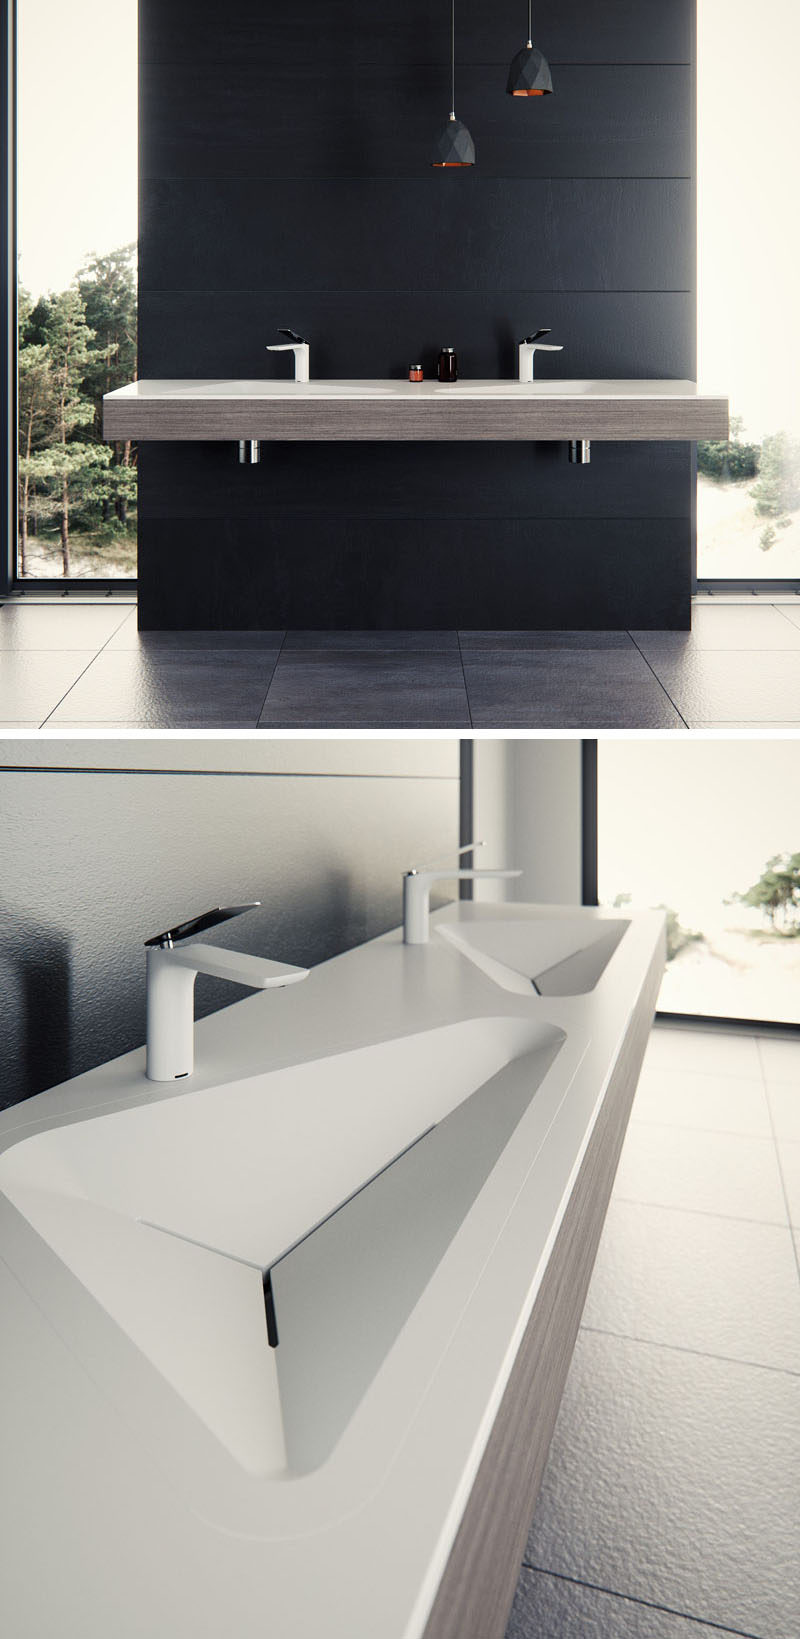 Le Projet have designed a modern bathroom sink that has contemporary crisp lines and geometric shapes. #BathroomDesign #BathroomSink #ModernBathroom